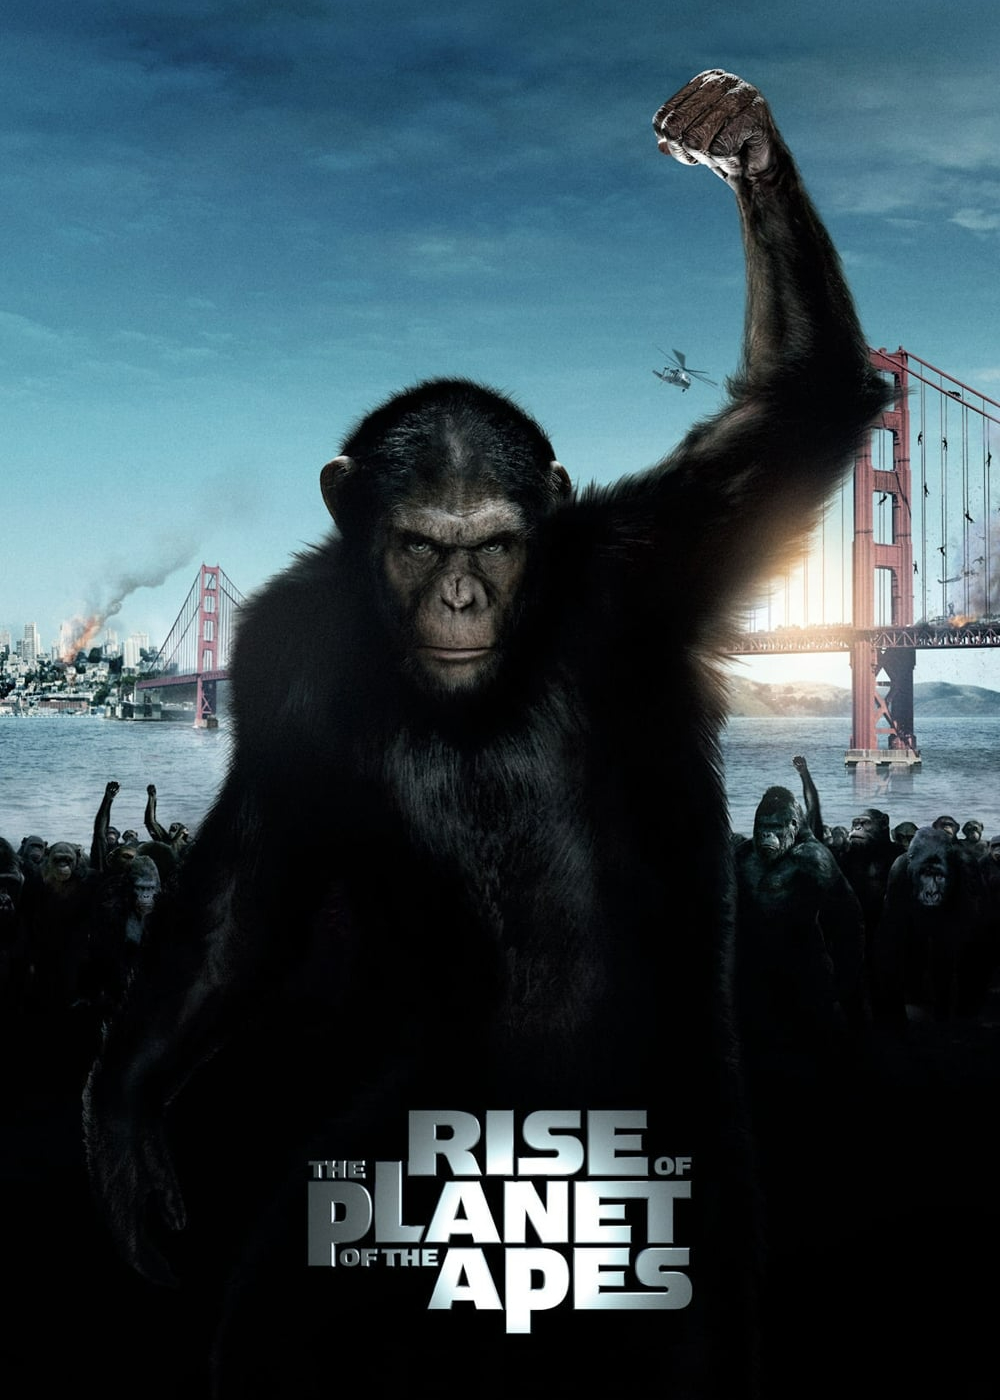 Poster Phim Sự Trỗi Dậy Của Hành Tinh Khỉ (Rise of the Planet of the Apes)